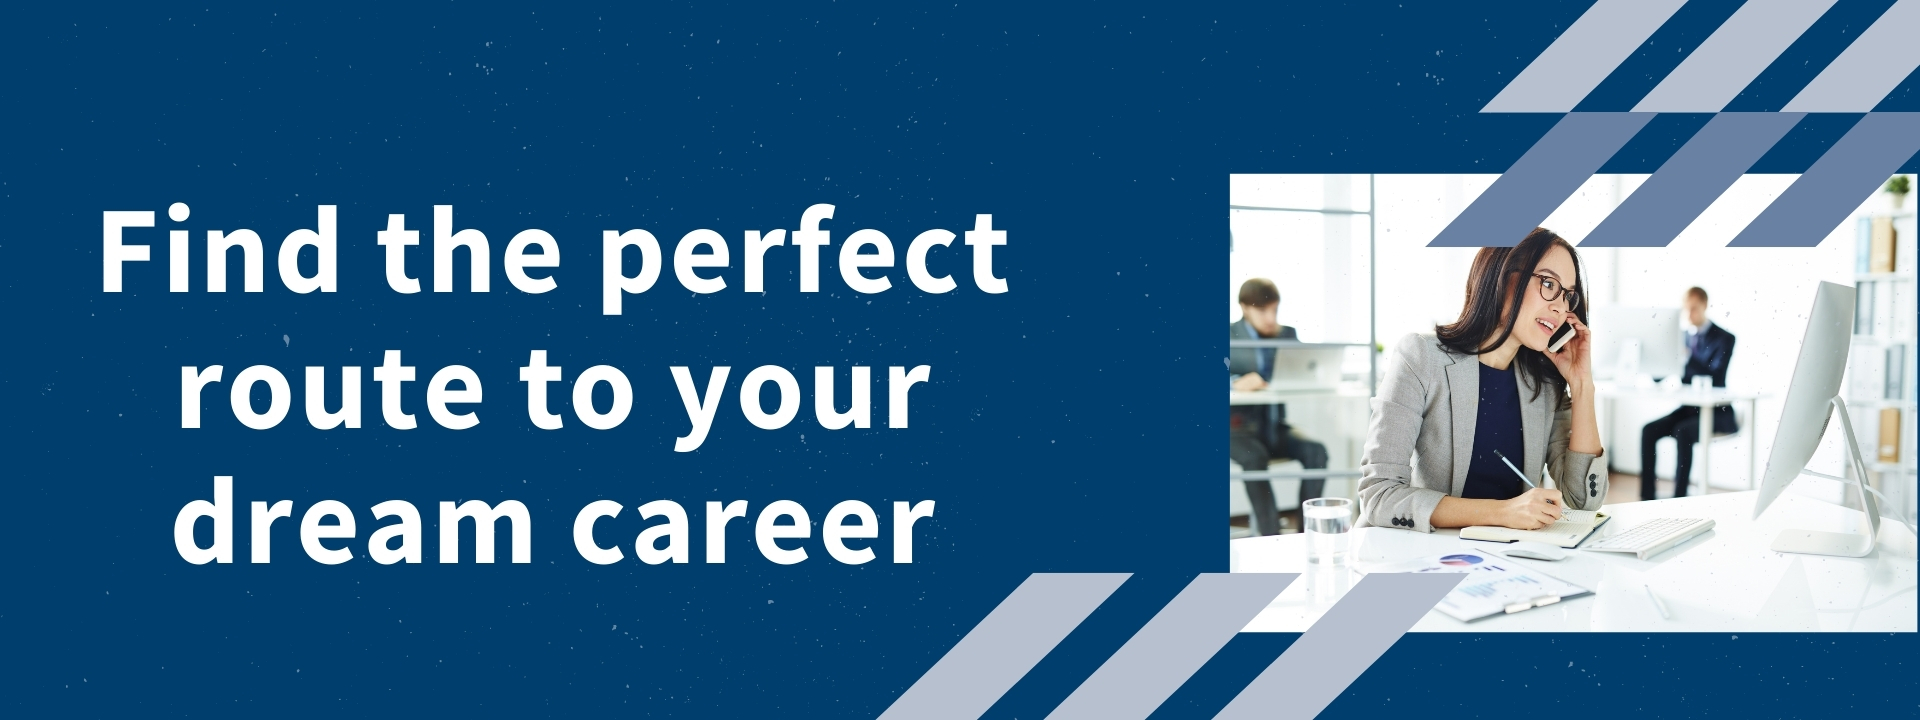 Find the perfect route to your dream career